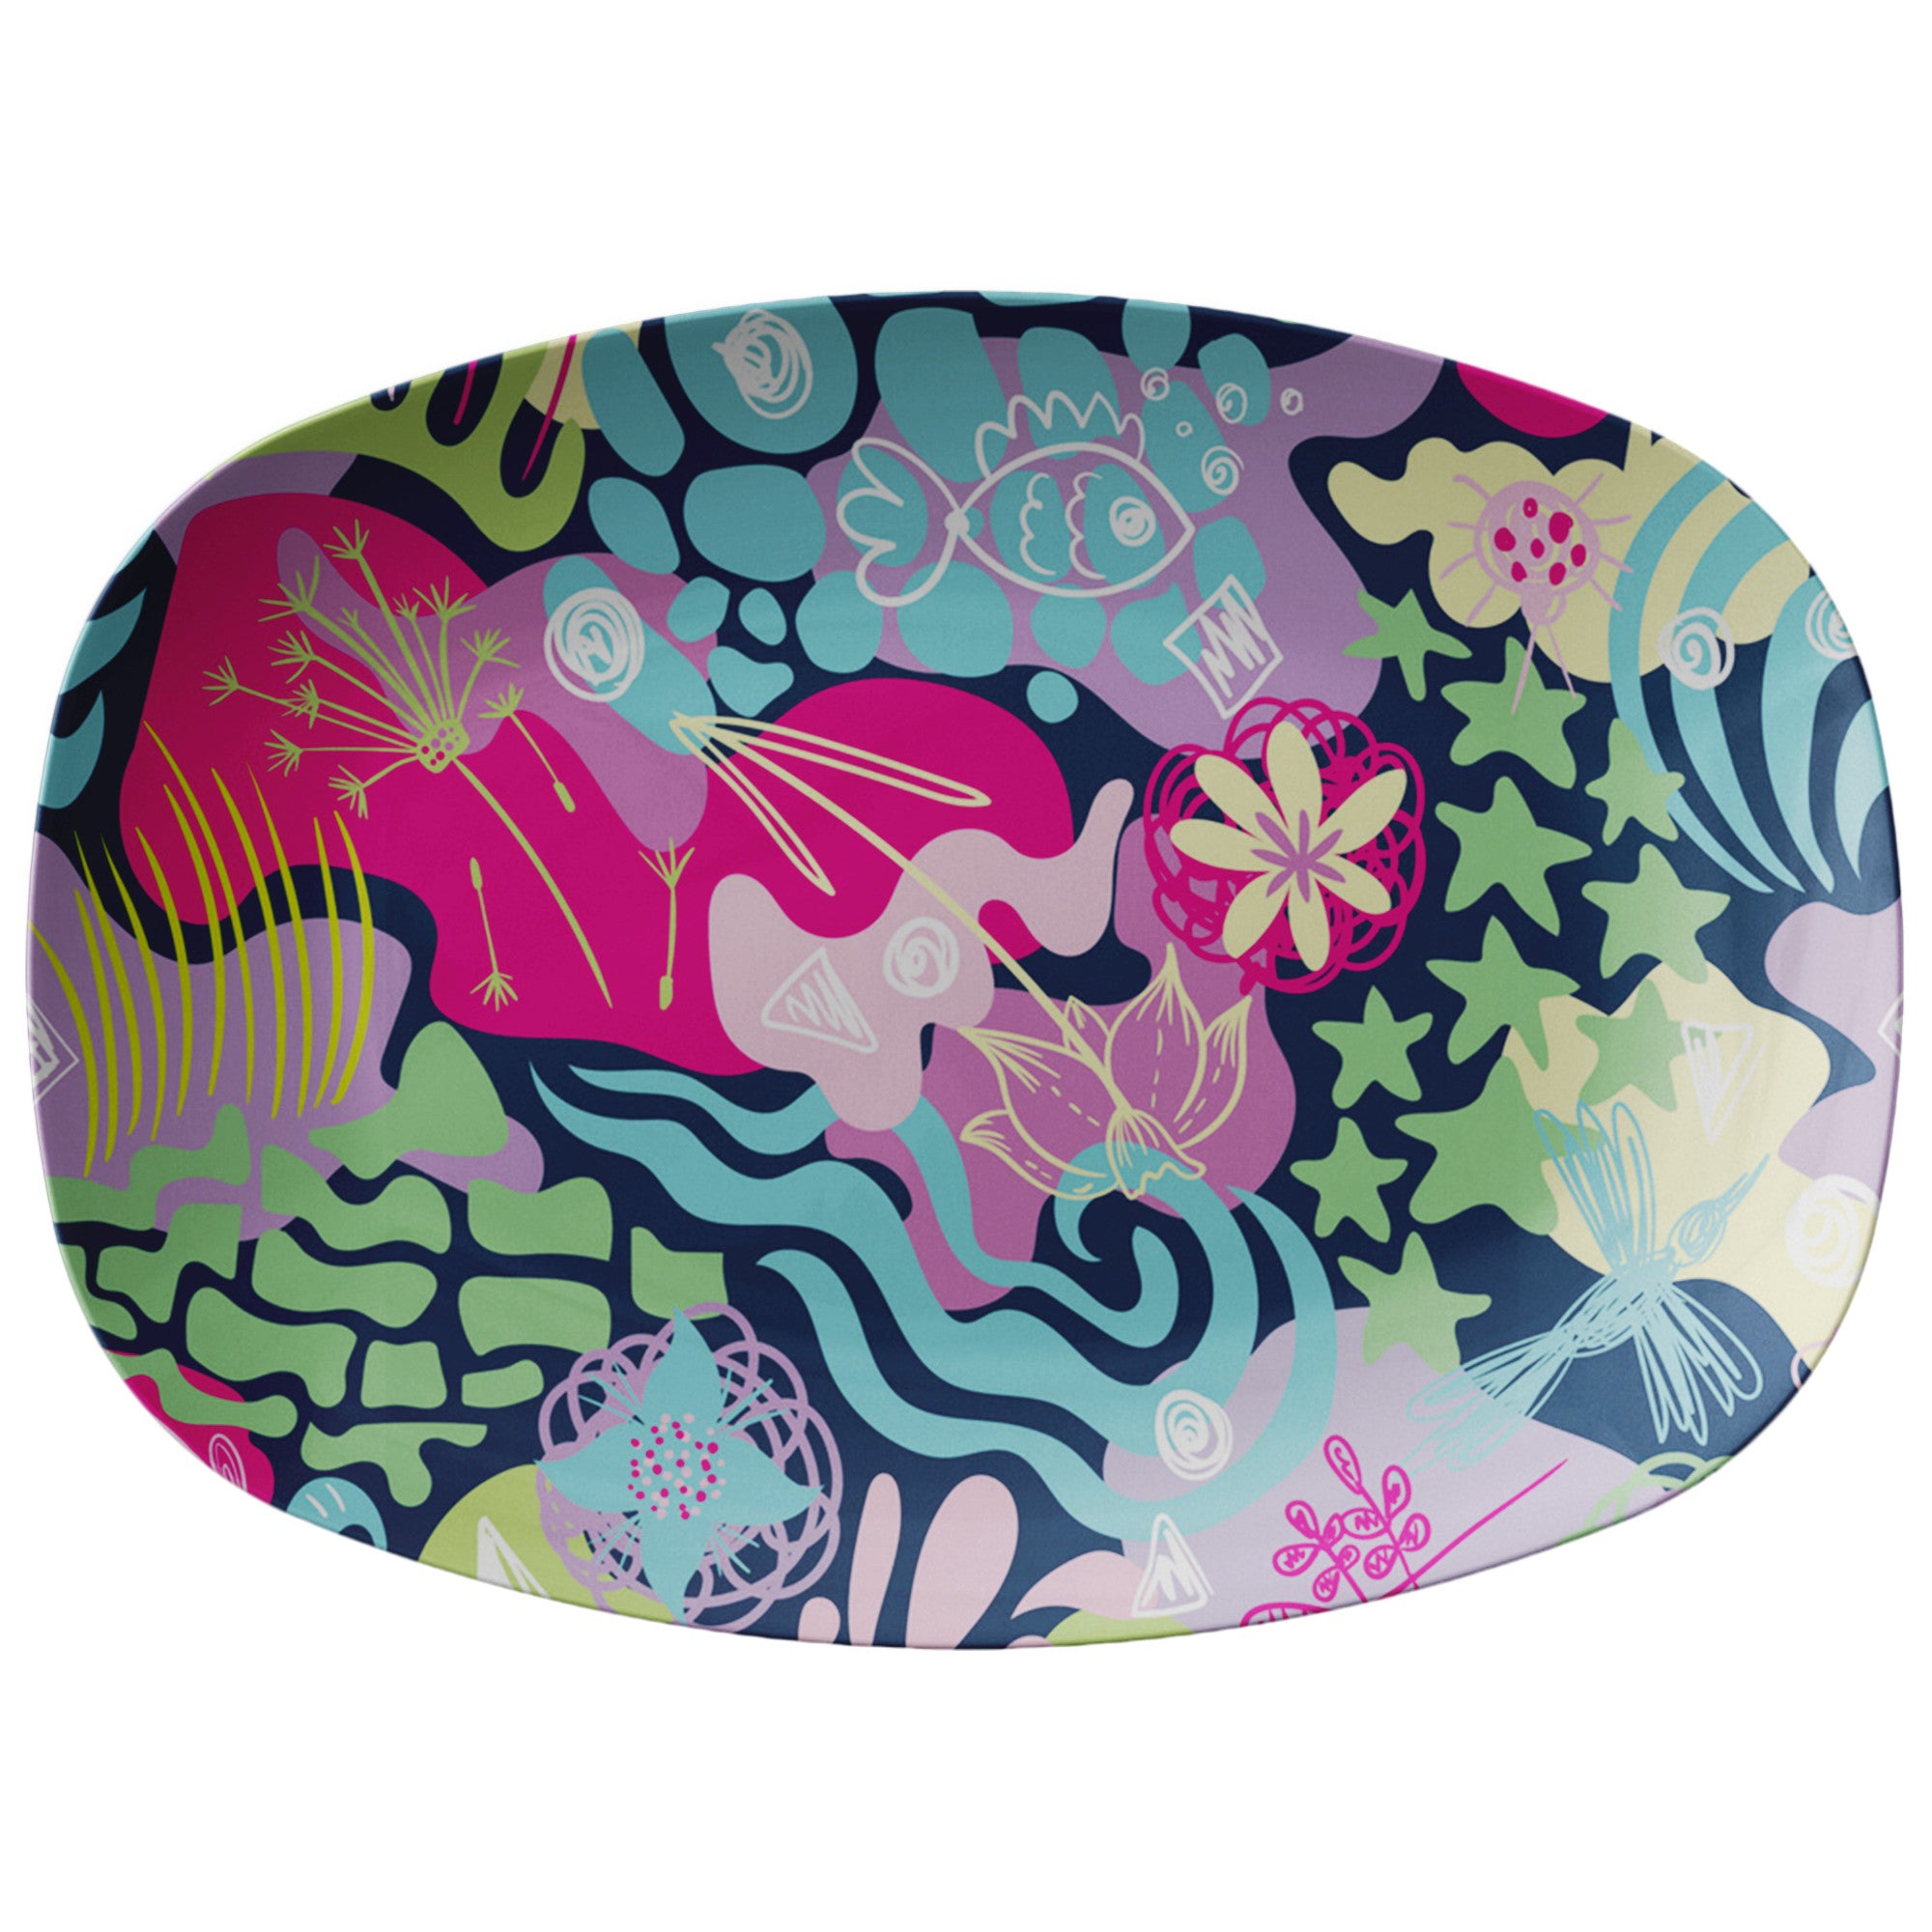 Printed Polymer Serving Platter - Doodle Me This